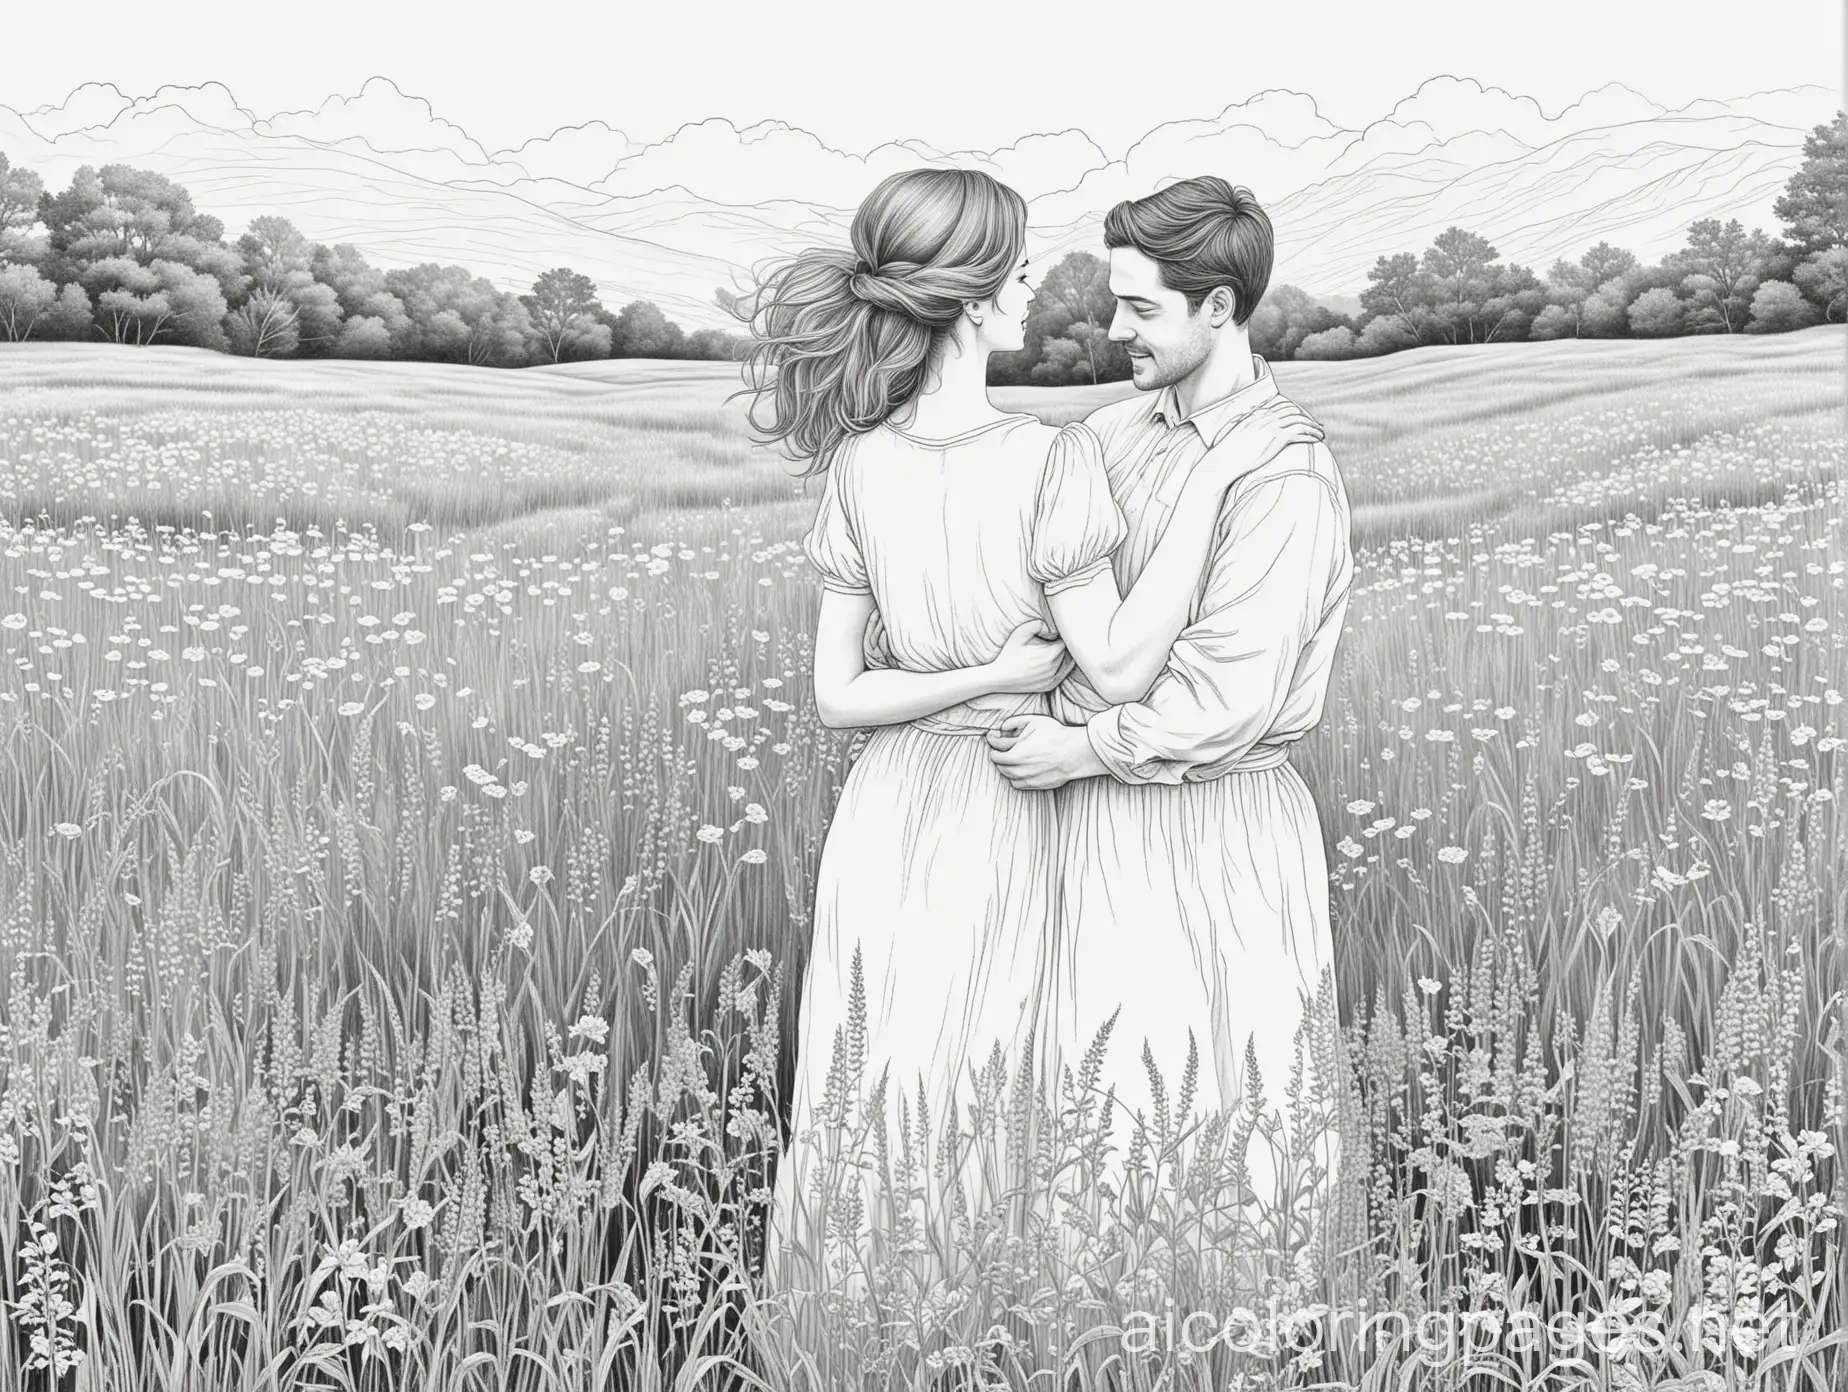 A couple, a man and a woman at night in the moonlight stand embraced in a field among field grasses and flowers, Coloring Page, black and white, line art, white background, Simplicity, Ample White Space. The background of the coloring page is plain white to make it easy for young children to color within the lines. The outlines of all the subjects are easy to distinguish, making it simple for kids to color without too much difficulty